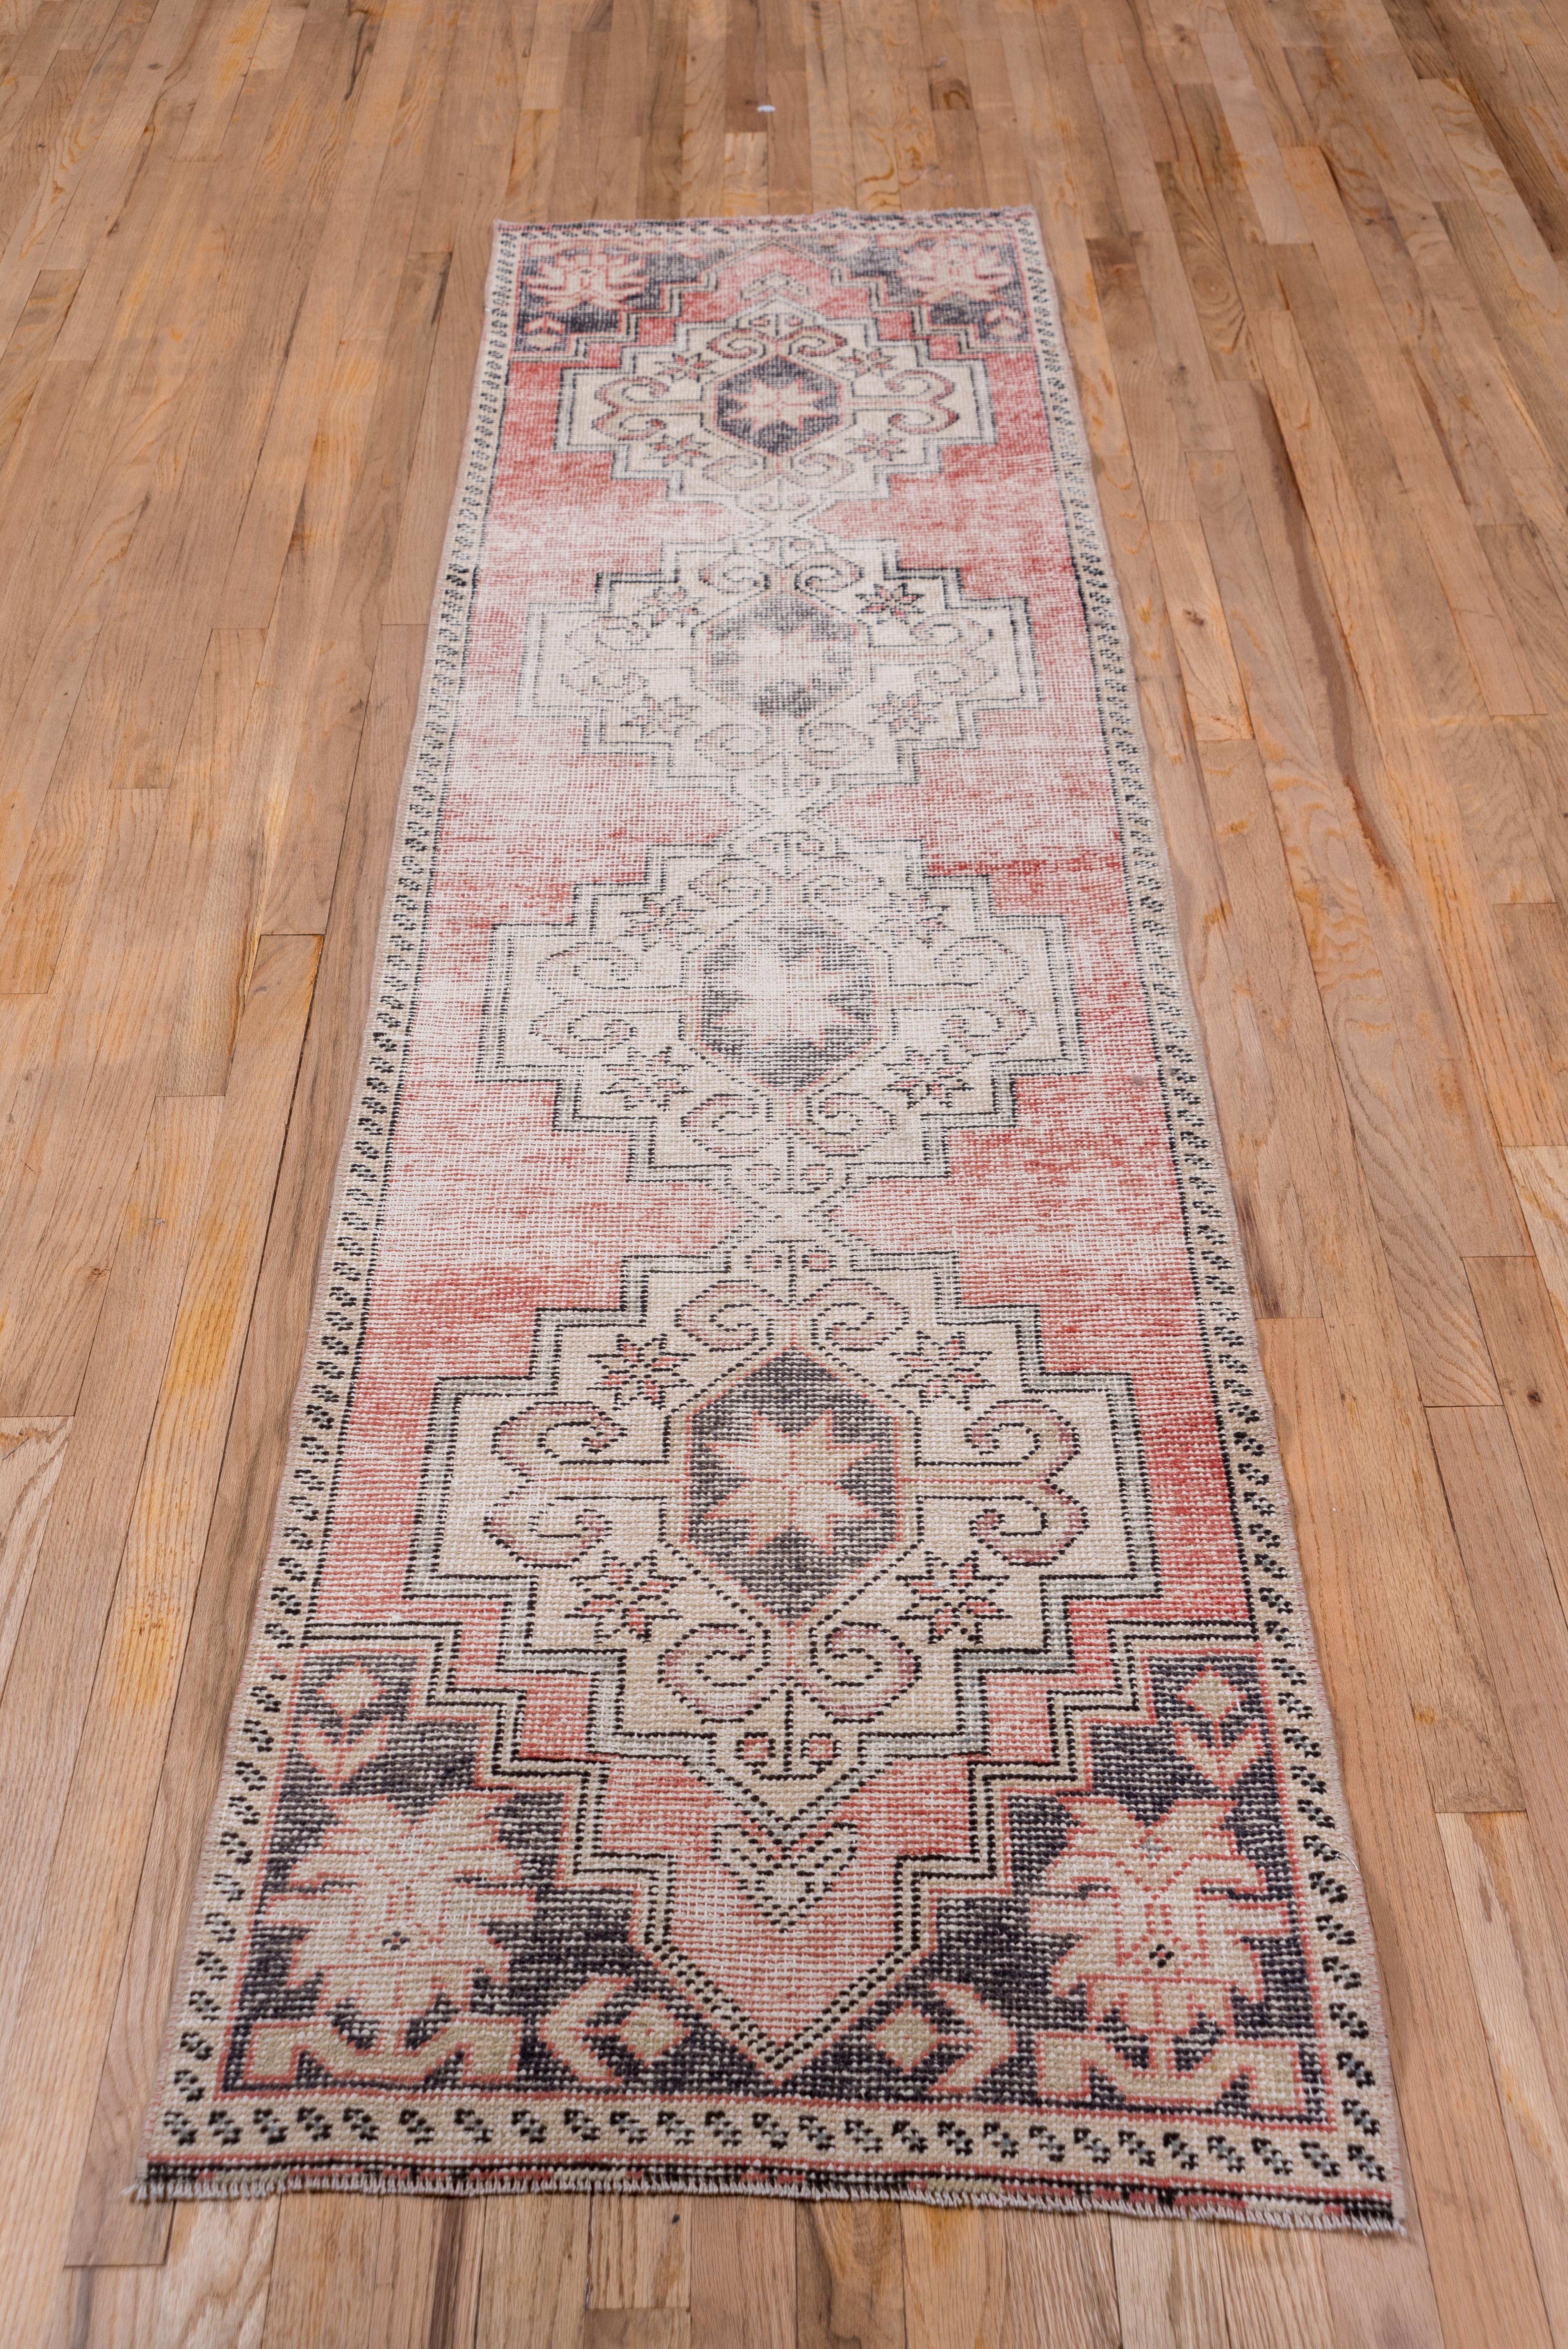 This small runner in distressed condition shows four large stepped sandy lozenges on a light, abrashed soft red ground within dark brown corners centered by ragged palmettes. The pattern is totally geometric with particularly bold rams' horn hooked